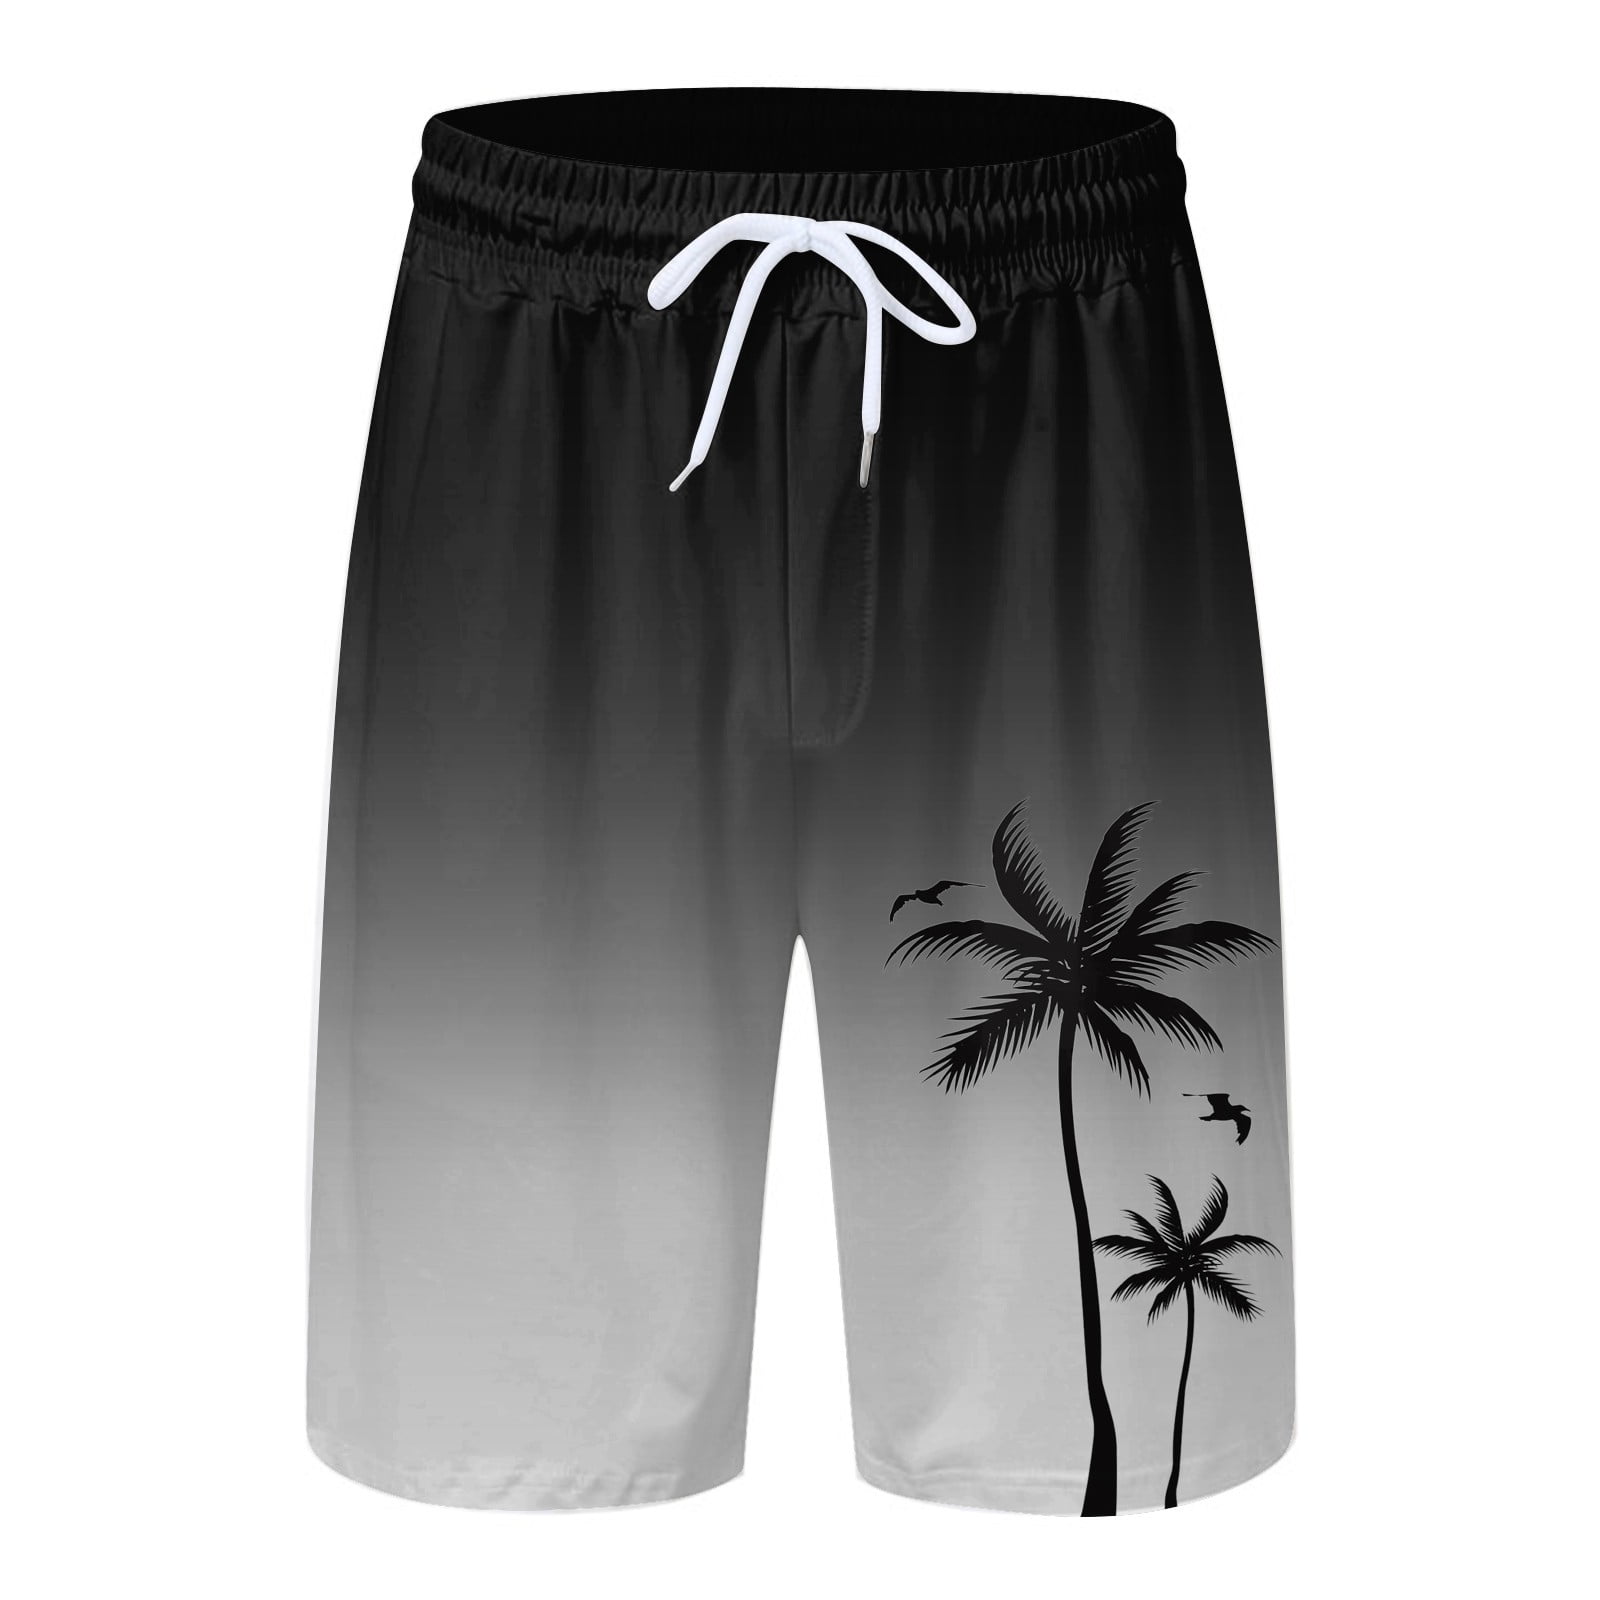 EHRWE Men's Running Shorts Swimsuit Mesh Lined With Beach Shorts And ...